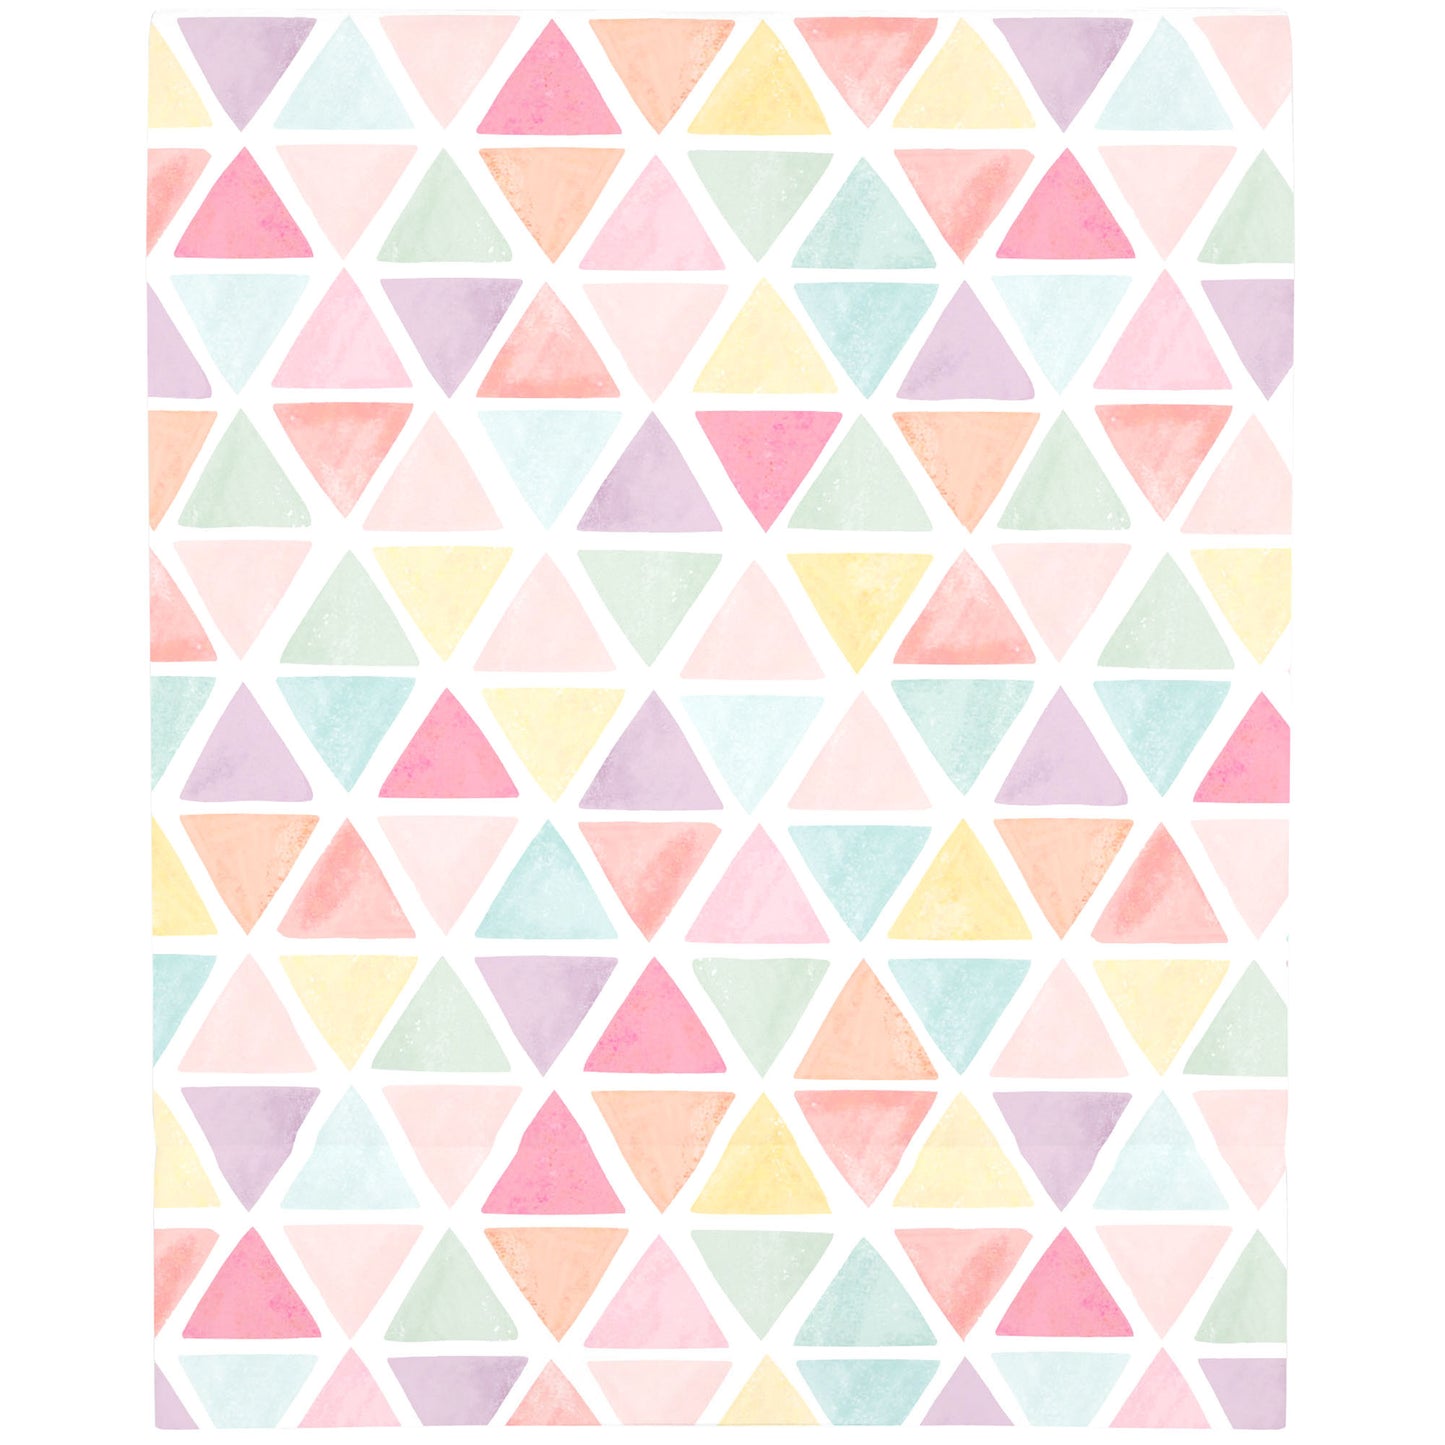 NoJo Watercolor Rainbow Mosaic Pink, Lavender, Aqua and Yellow Super Soft Fitted Crib Sheet